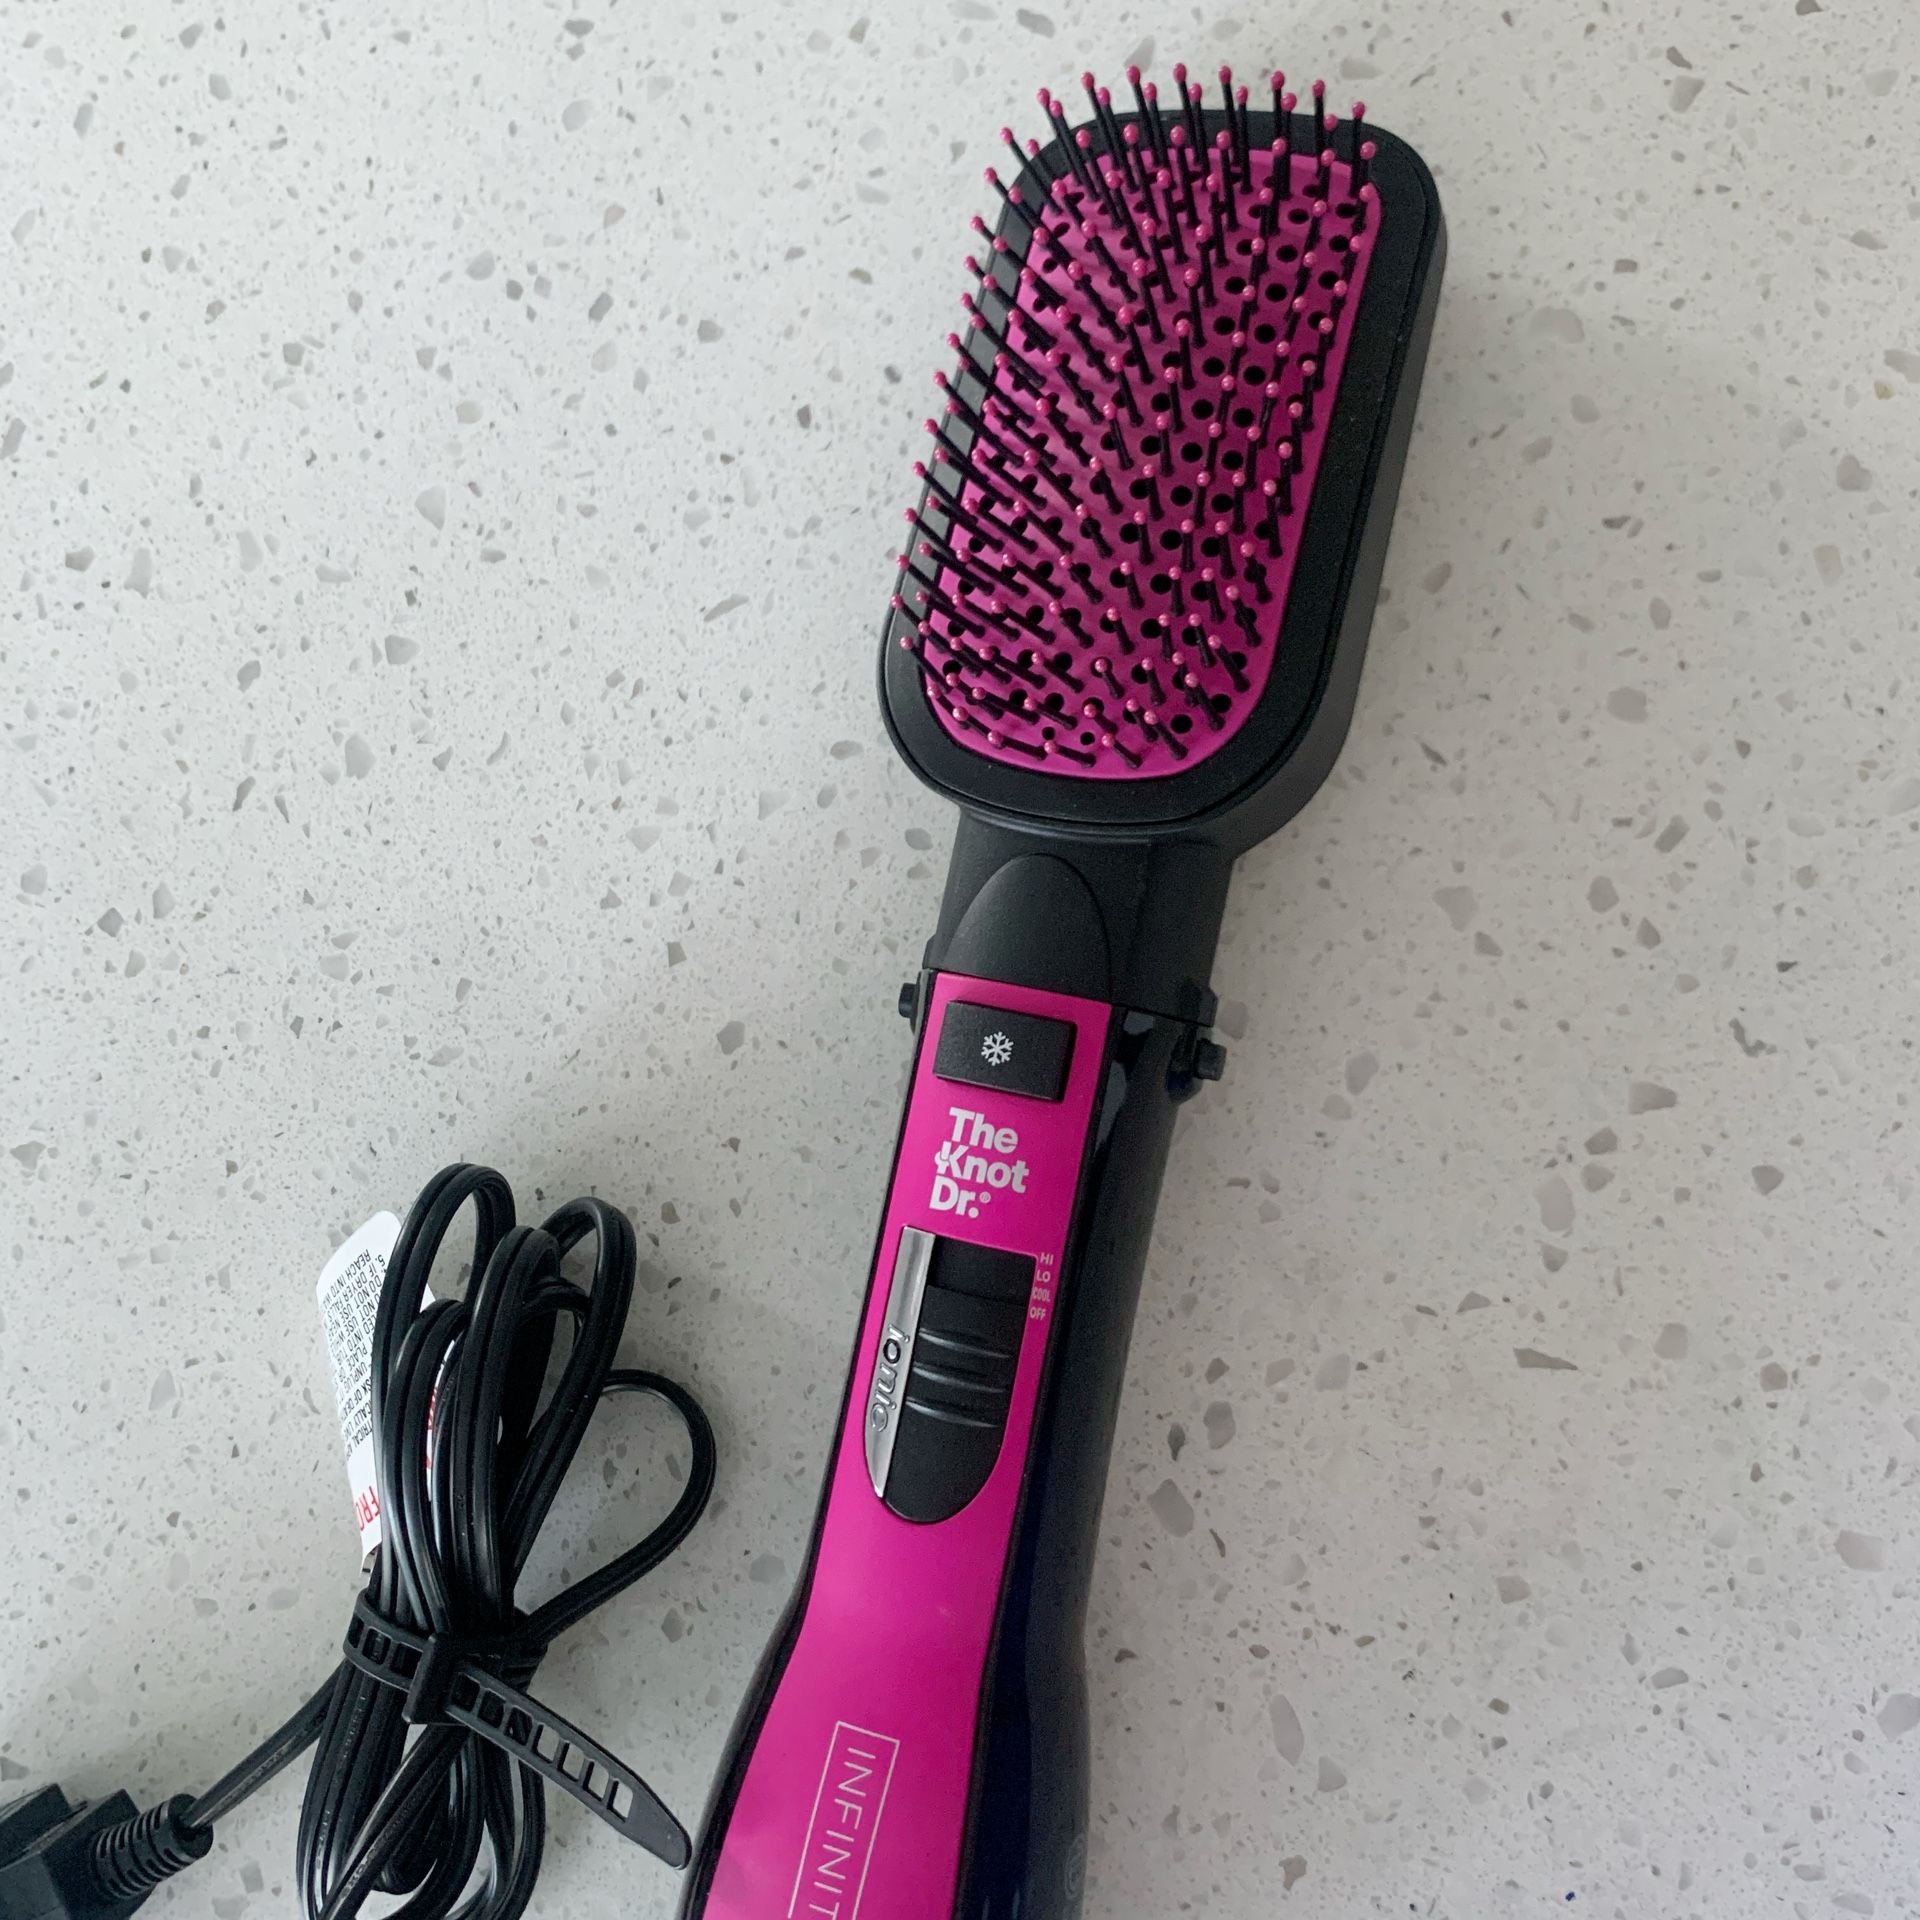 The Knot Dr by InfinitiPro Conair Hair Straightening Brush